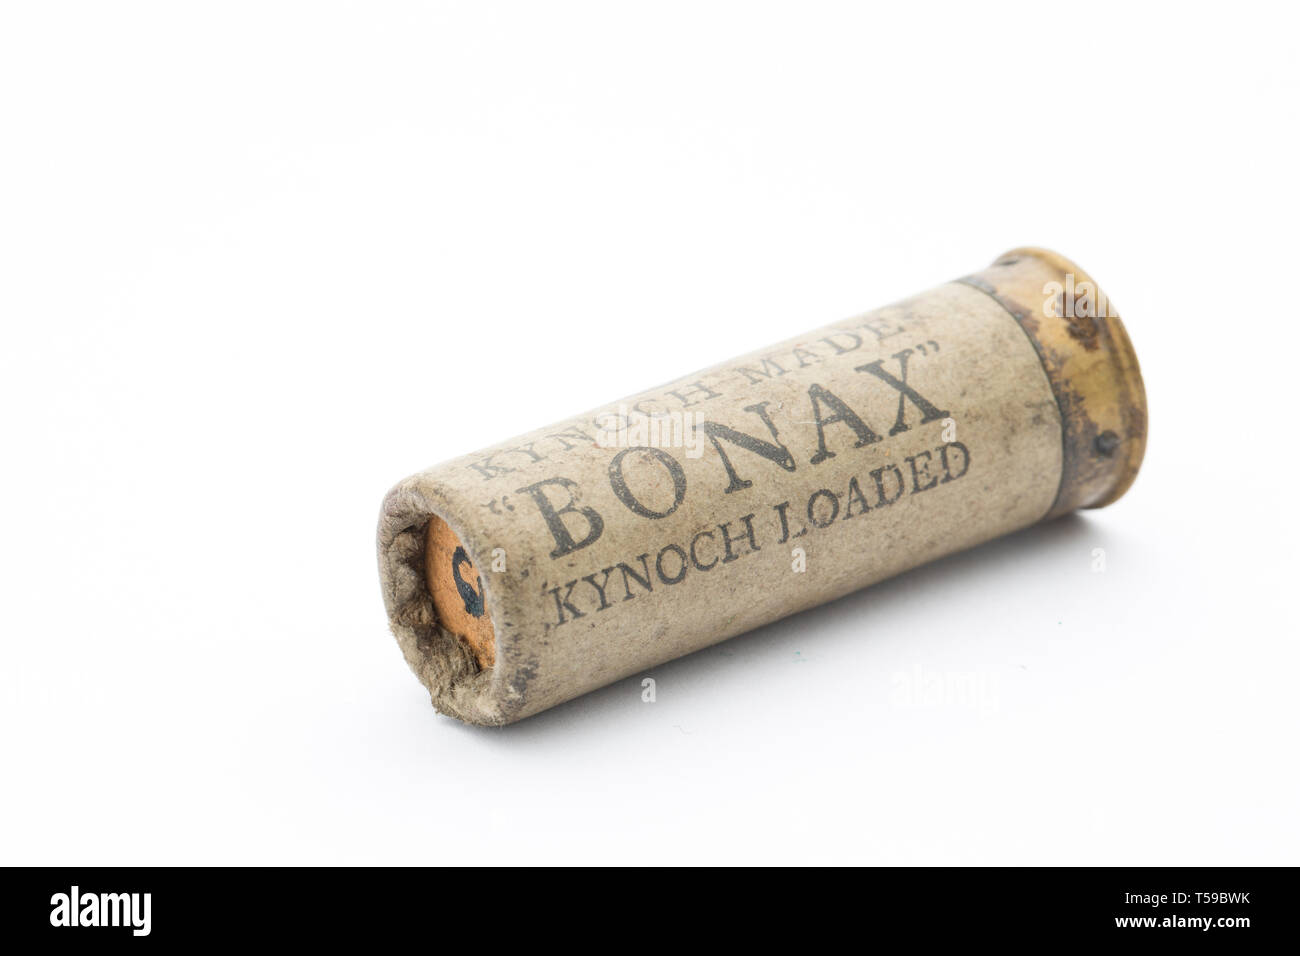 An old Kynoch Bonax paper case 12 gauge shotgun cartridge with a rolled turnover closure loaded with lead shot pellets. Collecting shotgun cartridges  Stock Photo